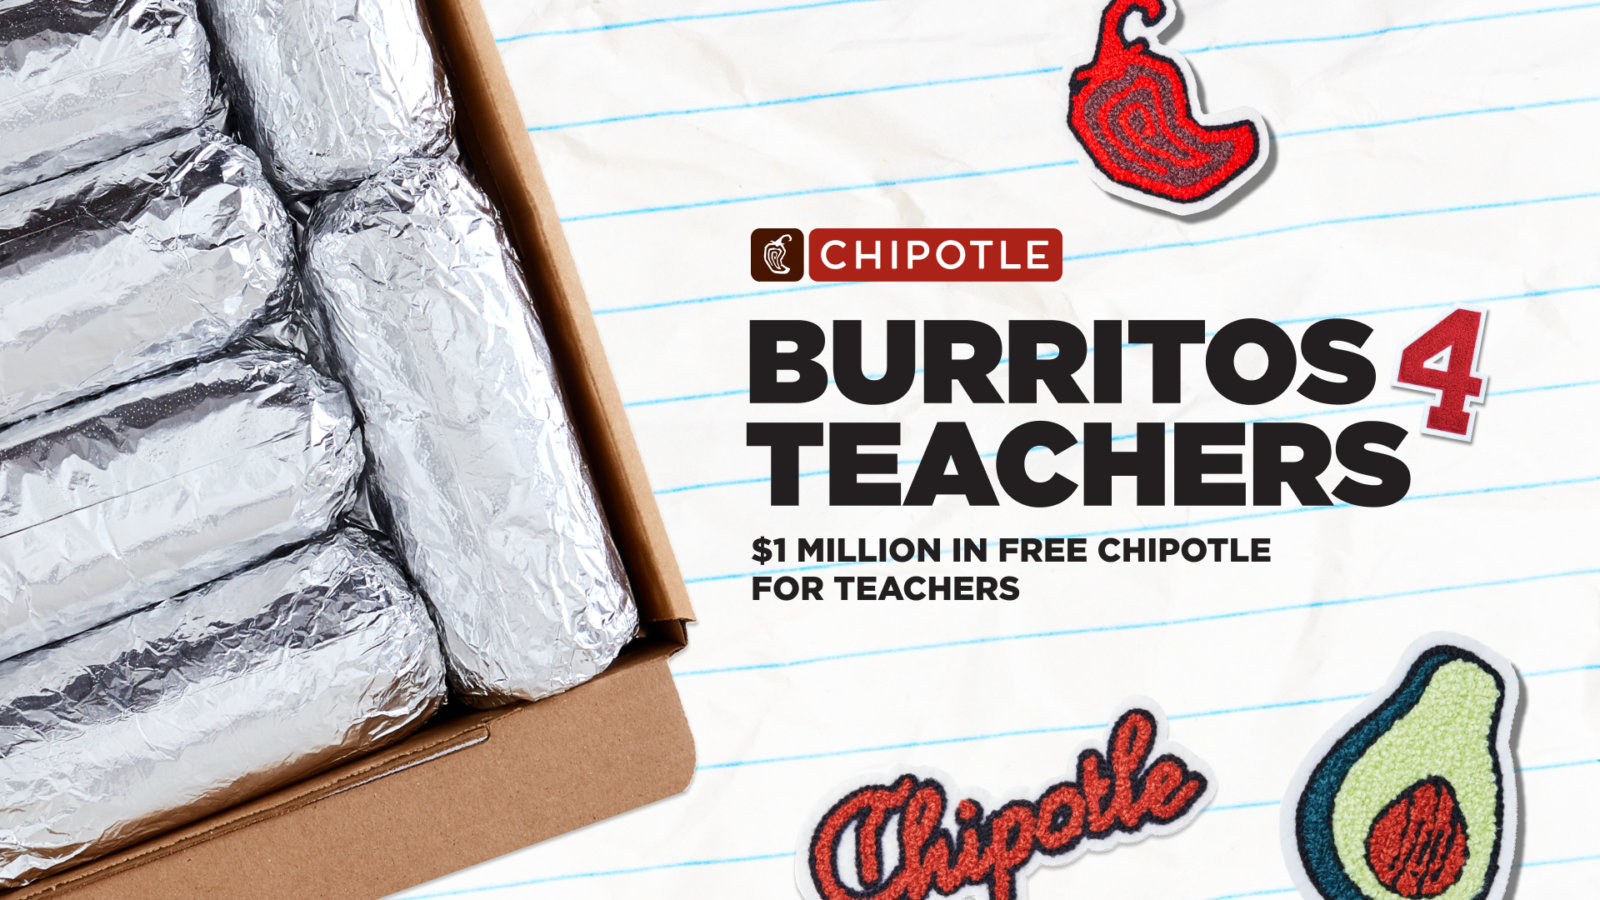 New York teachers can win free Chipotle for their school amNewYork